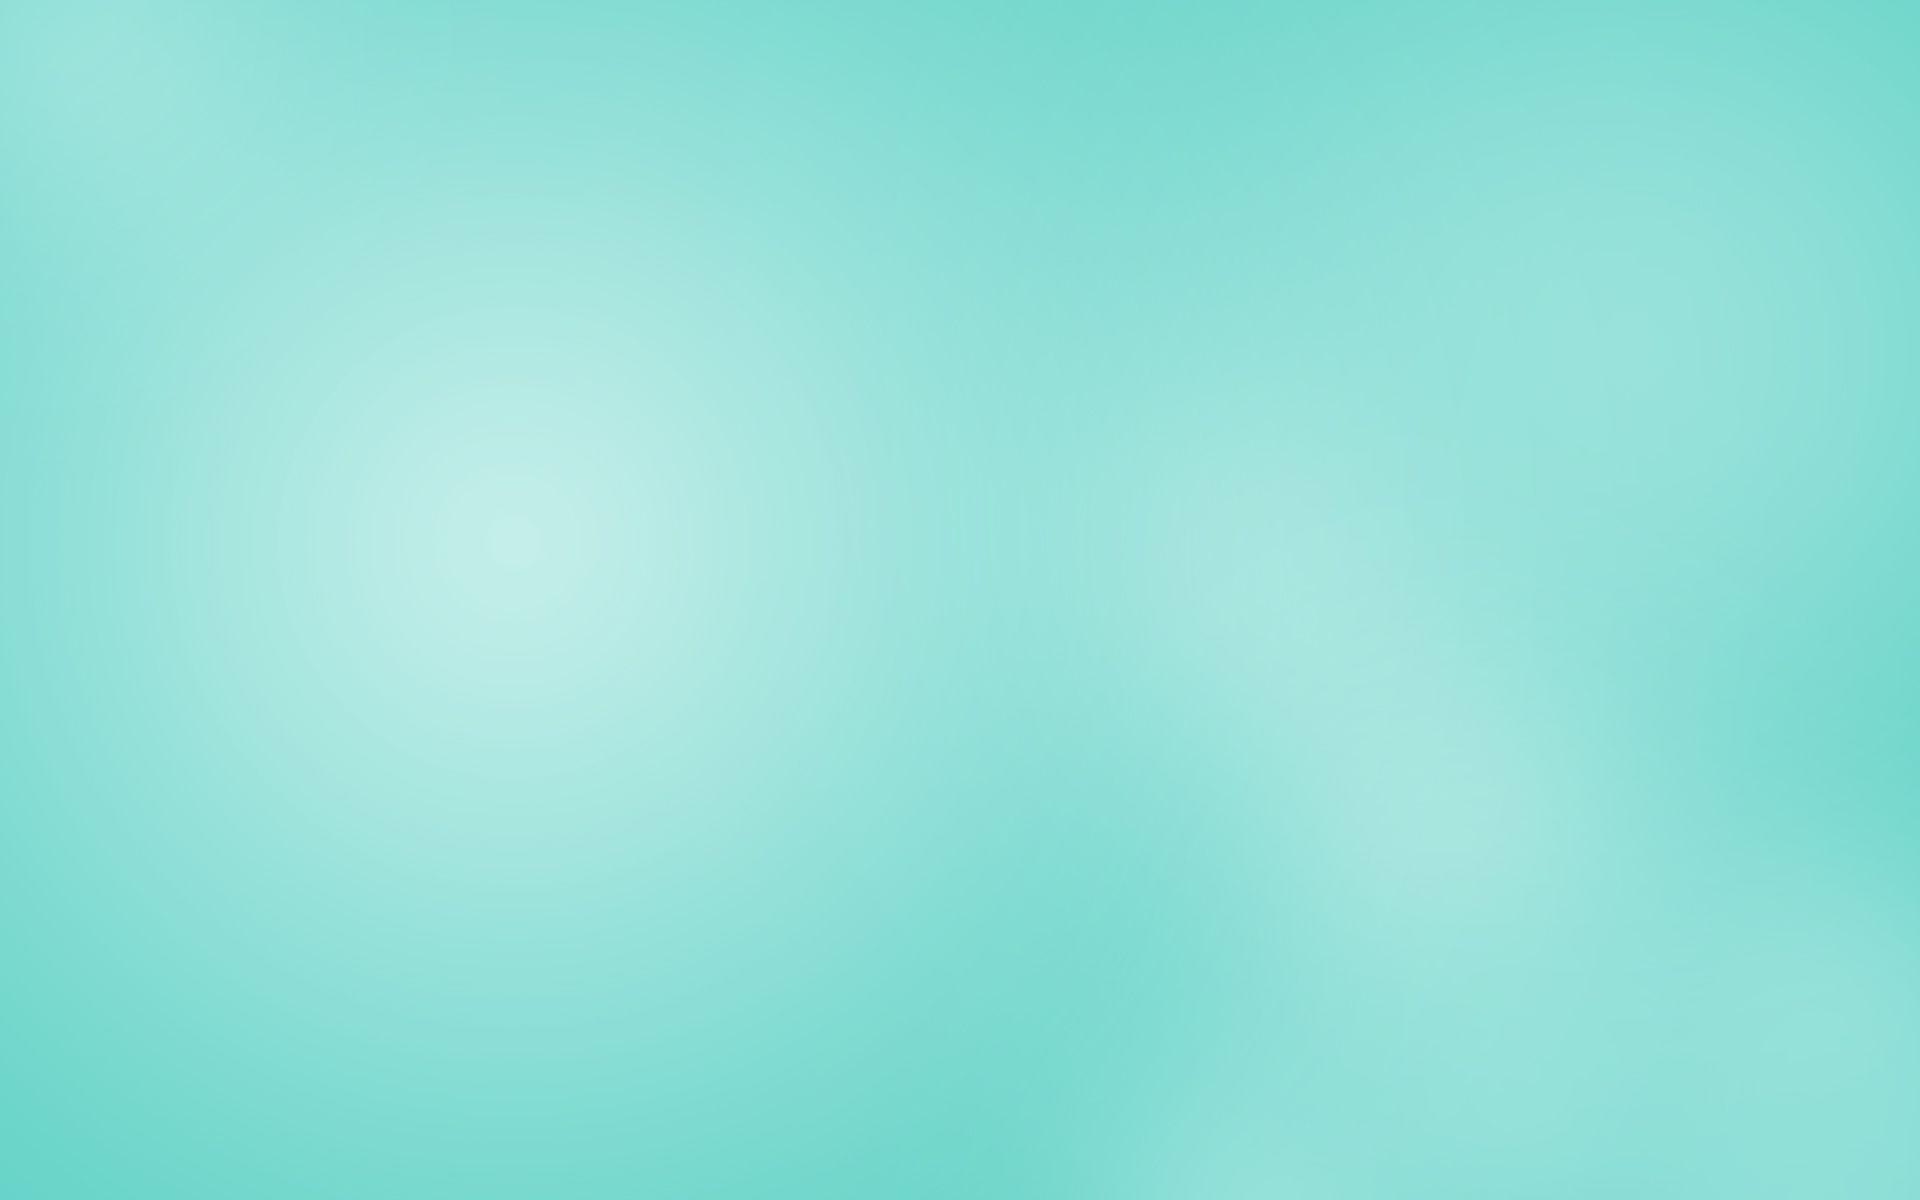 Adorable HDQ Background of Mint Green, 50 Mint Green 100% Quality